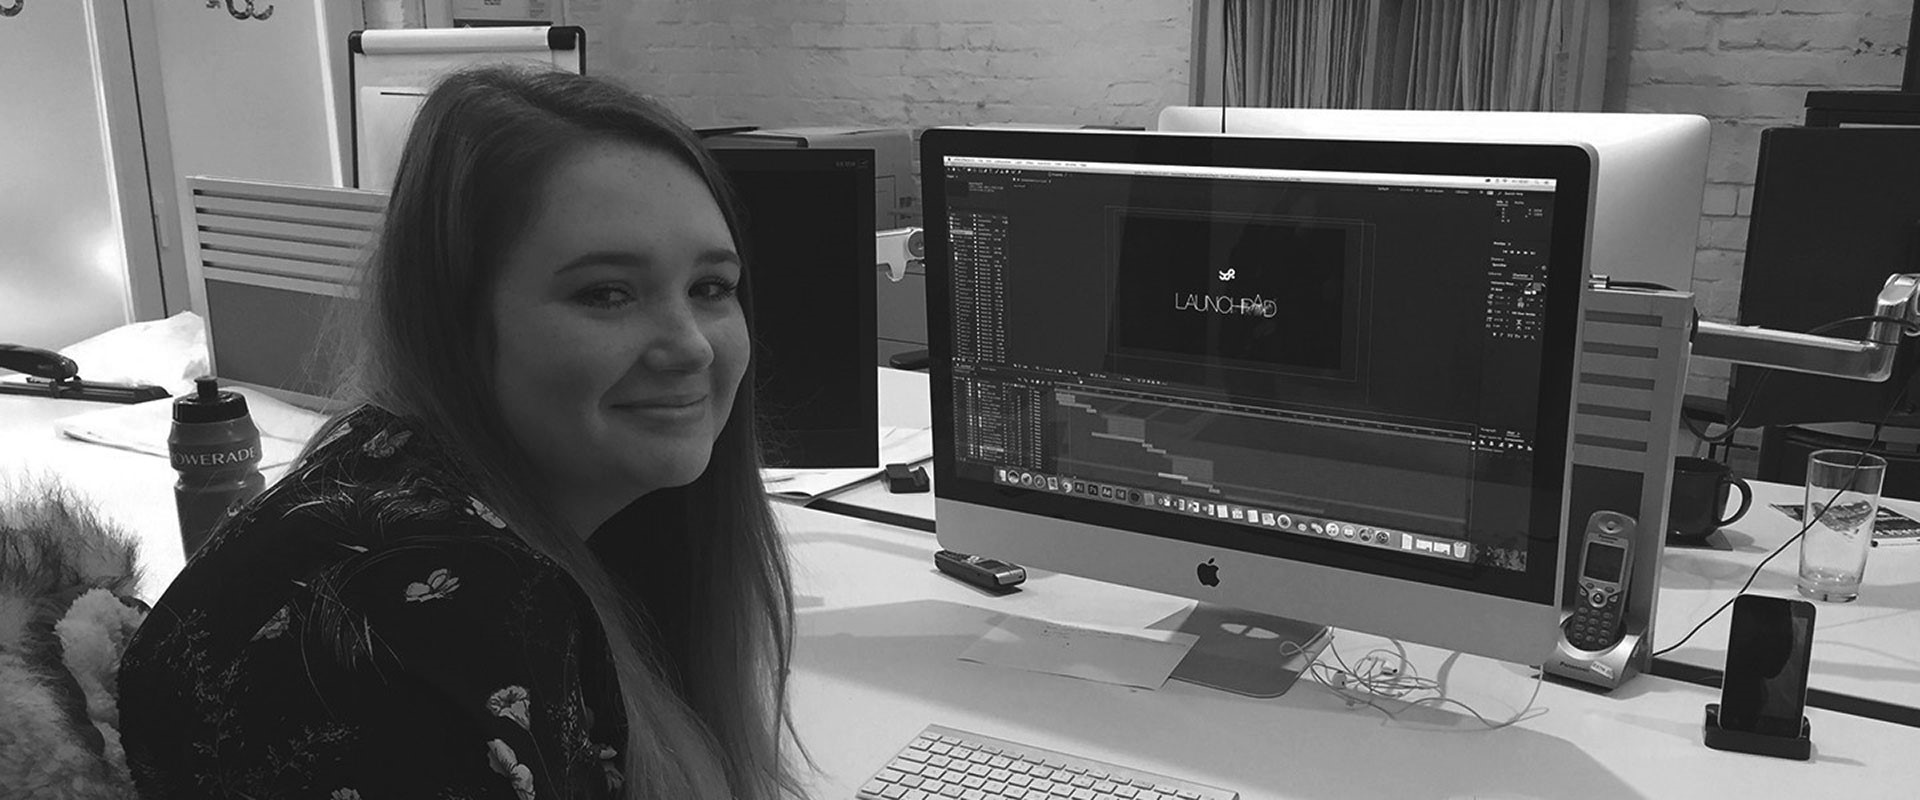 What’s young, creative and keen to learn? Our latest placement student, Bethan Potter.